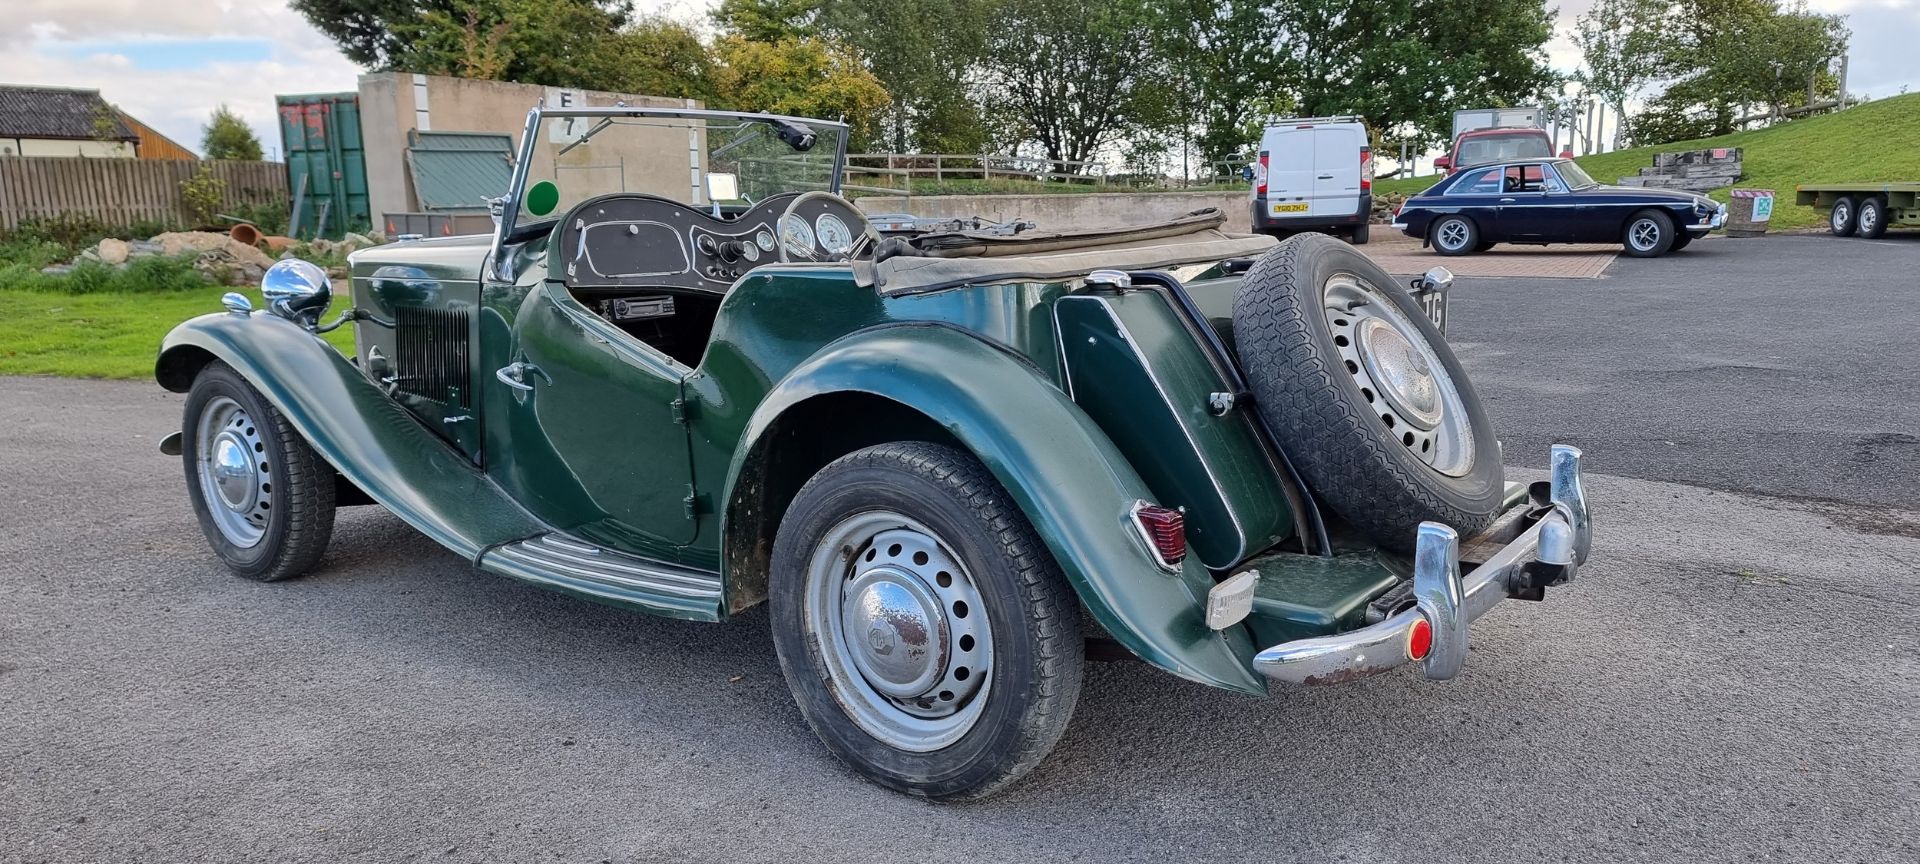 1952 MG TD, 1250cc. Registration number LTG 697. Chassis number TD 126630. Body Type 22381 Body - Image 6 of 20